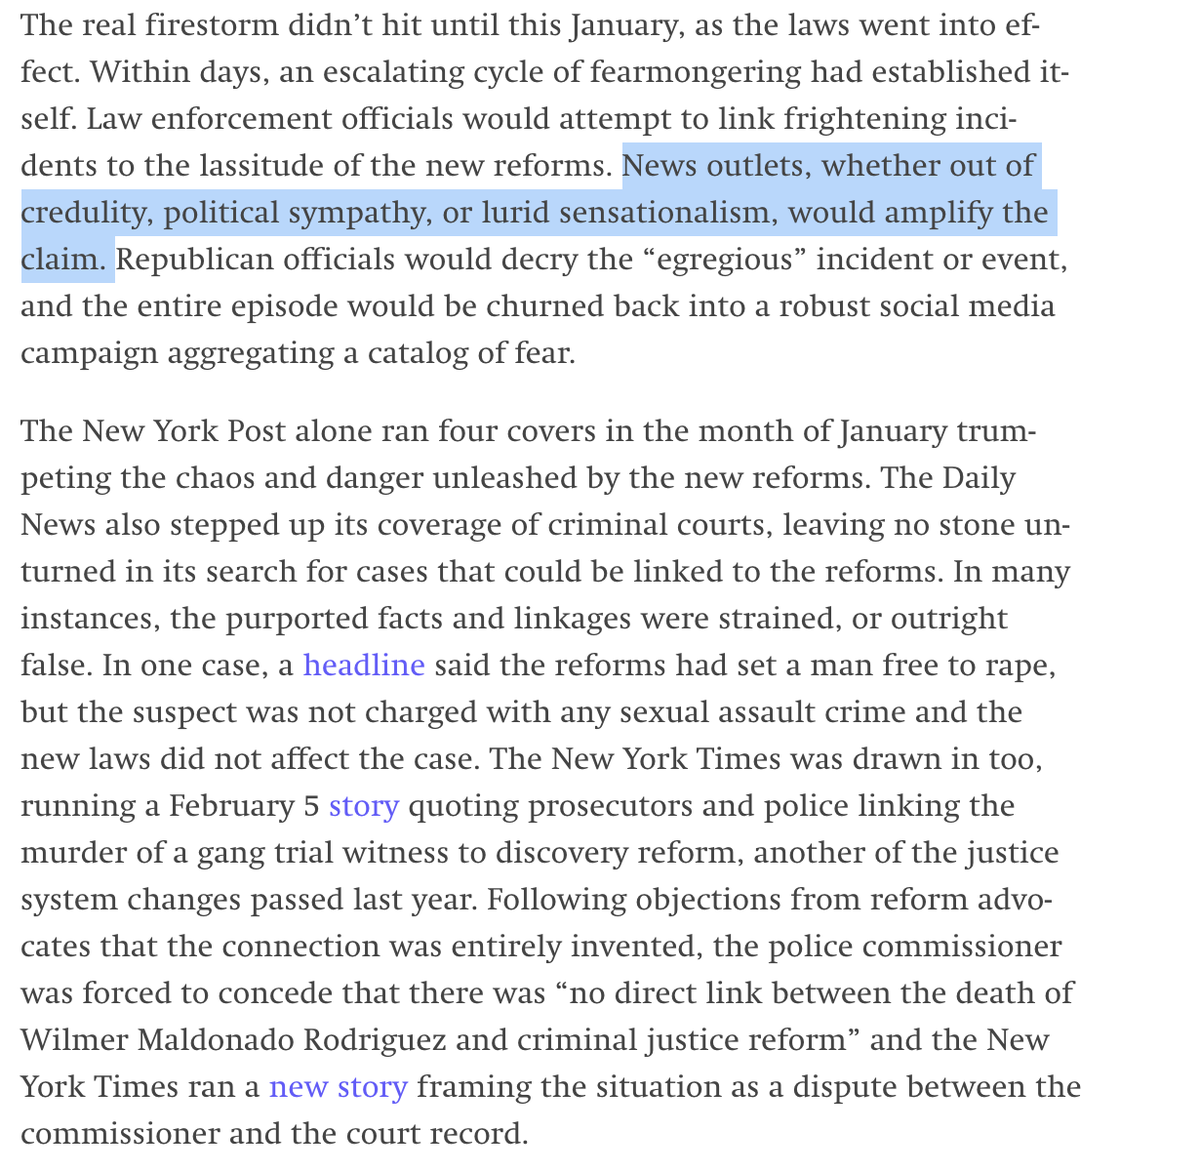 26. This kind of reporting has real consequences  @migold  @AshleyAtTimes. For example, law enforcement interests used precisely this kind of false fearmongering to roll back bail reform earlier this year. And the media – just like you – played a key role.  https://theintercept.com/2020/02/23/criminal-justice-bail-reform-backlash-new-york/